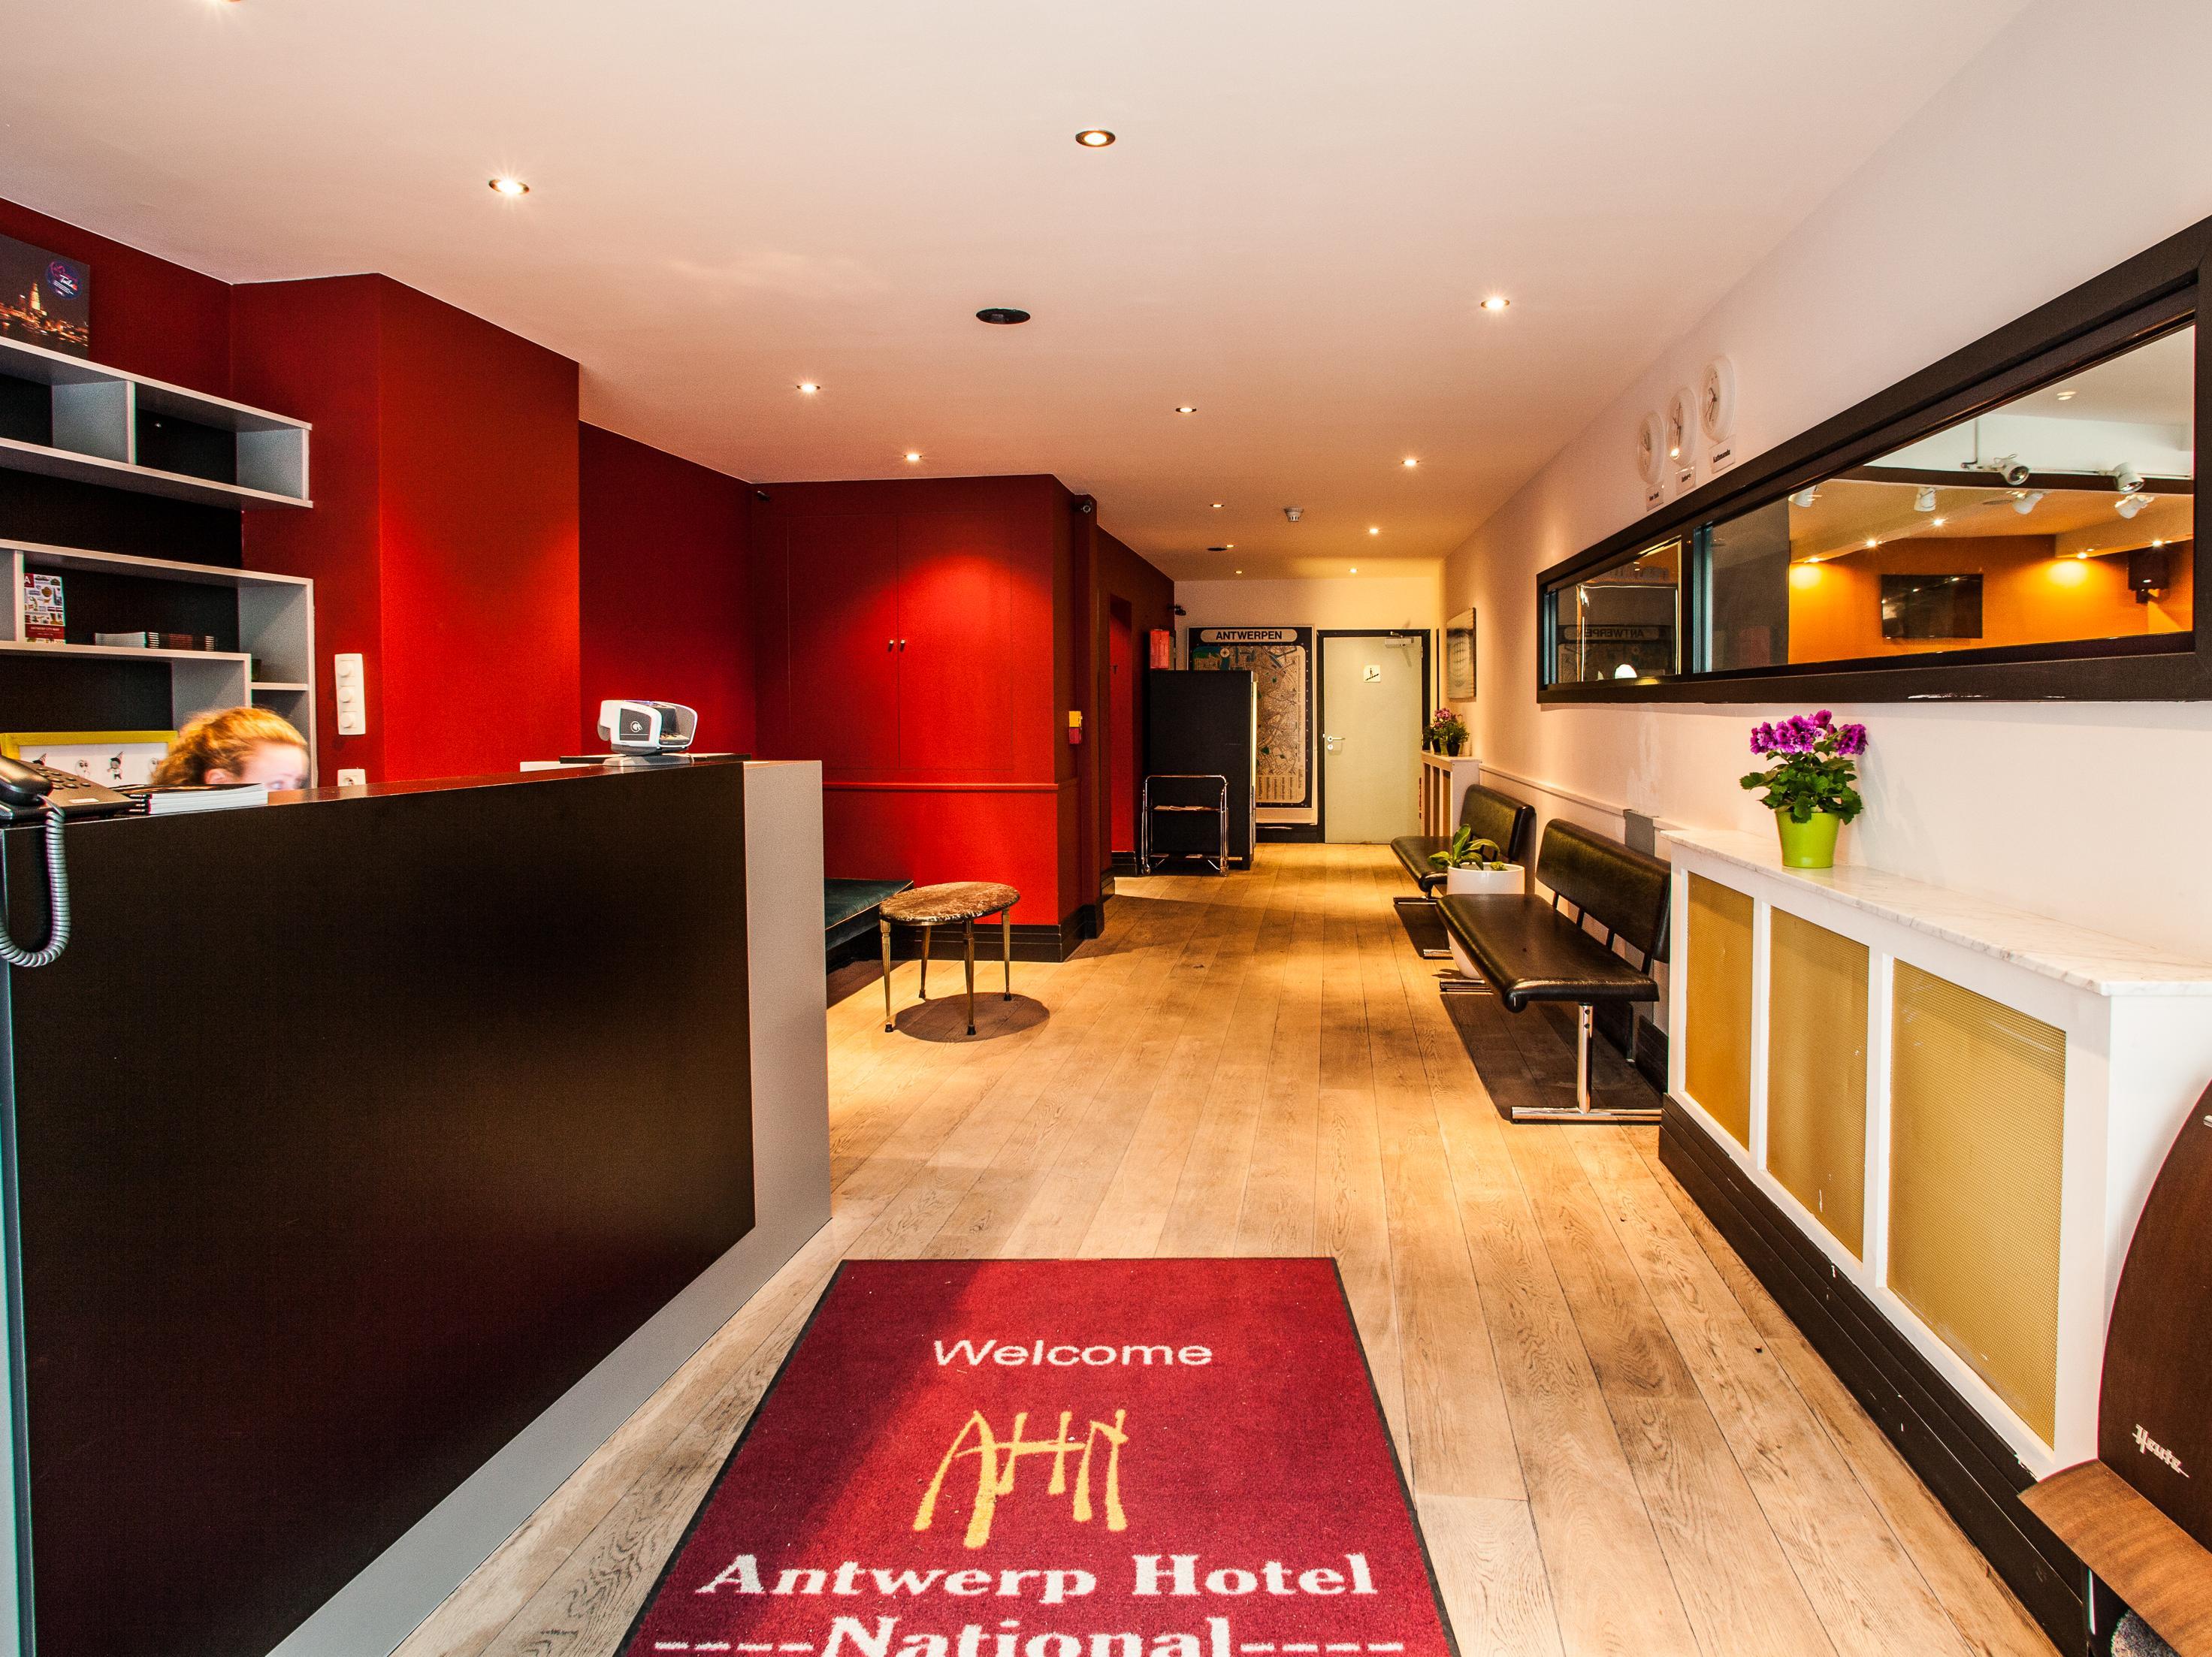 Hotel National Antwerp FAQ 2017, What facilities are there in Hotel National Antwerp 2017, What Languages Spoken are Supported in Hotel National Antwerp 2017, Which payment cards are accepted in Hotel National Antwerp , Antwerp Hotel National room facilities and services Q&A 2017, Antwerp Hotel National online booking services 2017, Antwerp Hotel National address 2017, Antwerp Hotel National telephone number 2017,Antwerp Hotel National map 2017, Antwerp Hotel National traffic guide 2017, how to go Antwerp Hotel National, Antwerp Hotel National booking online 2017, Antwerp Hotel National room types 2017.